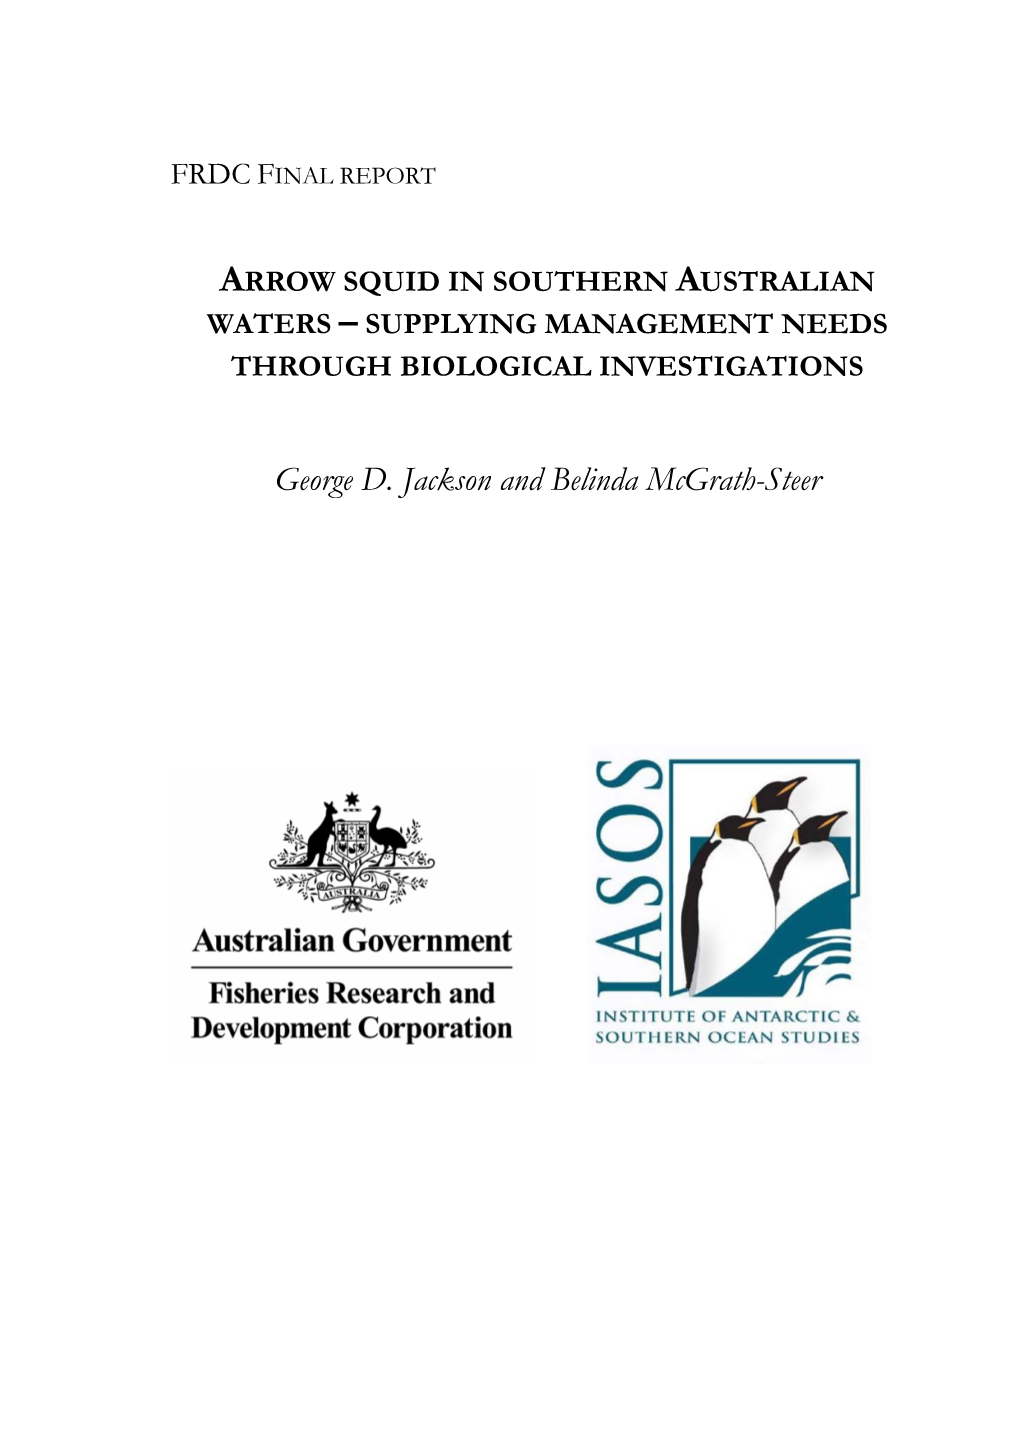 Arrow Squid in Southern Australian Waters – Supplying Management Needs Through Biological Investigations